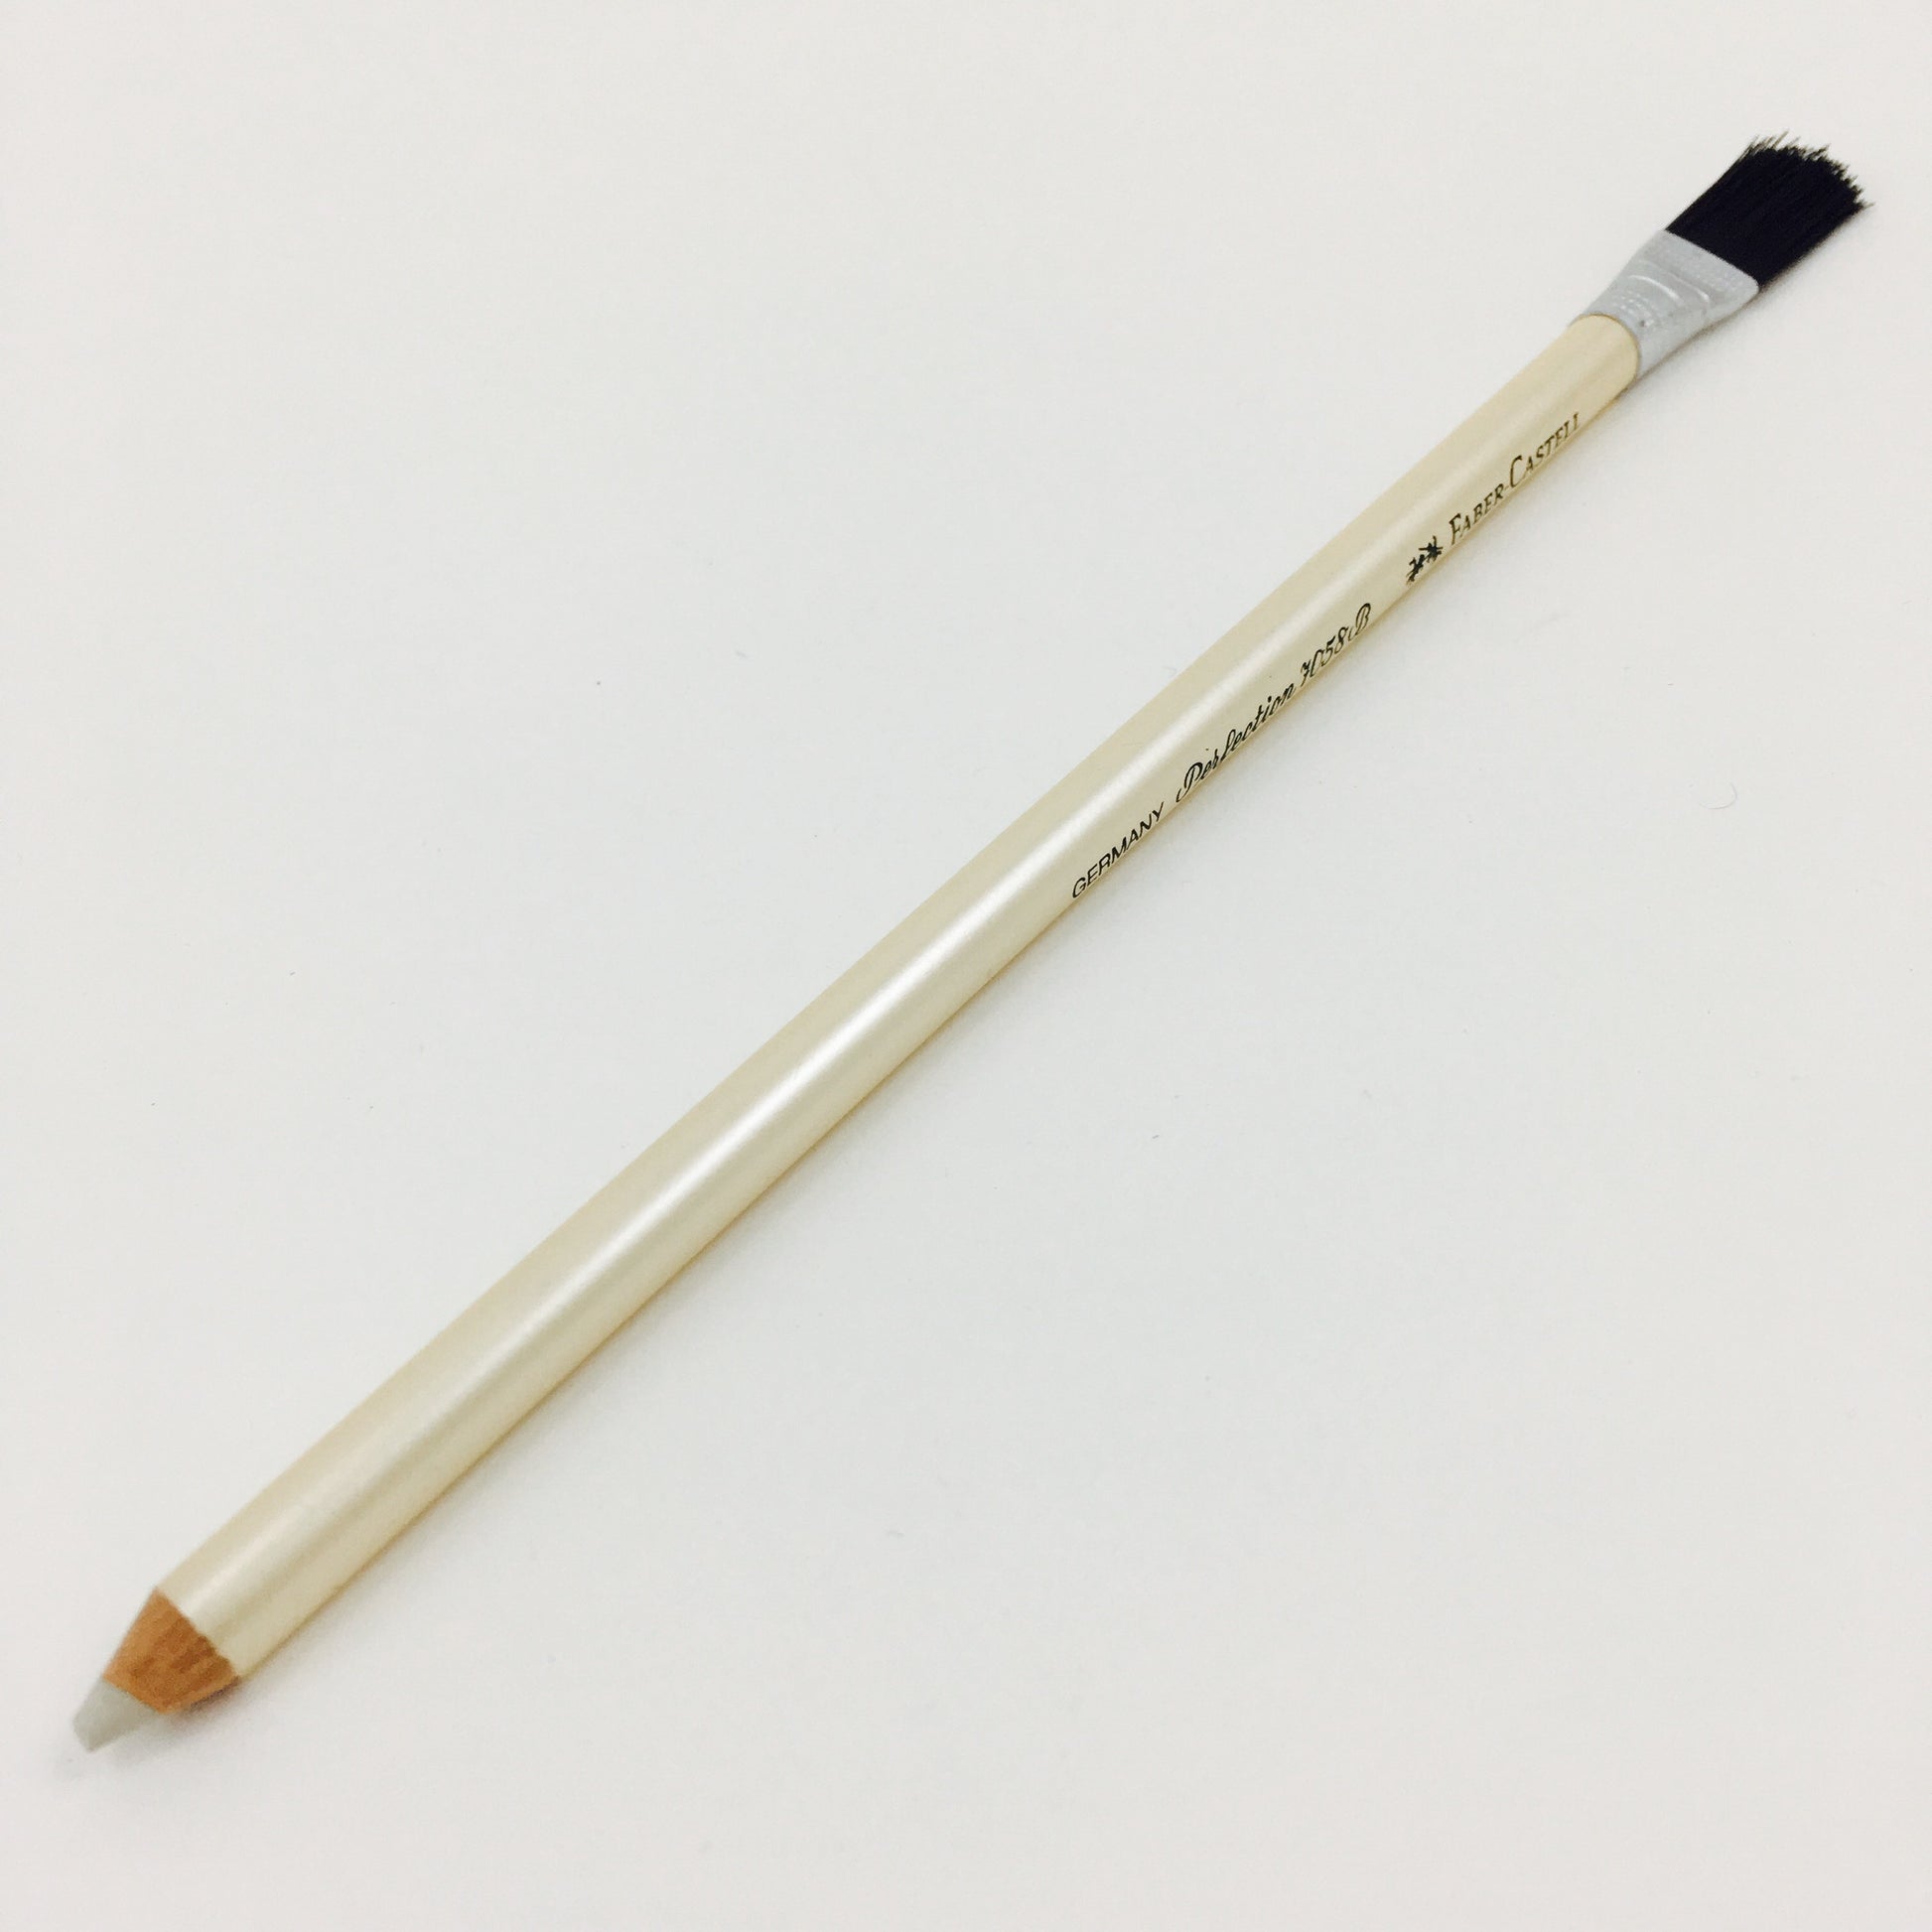 Faber-Castell Perfection Eraser Pencil with Brush